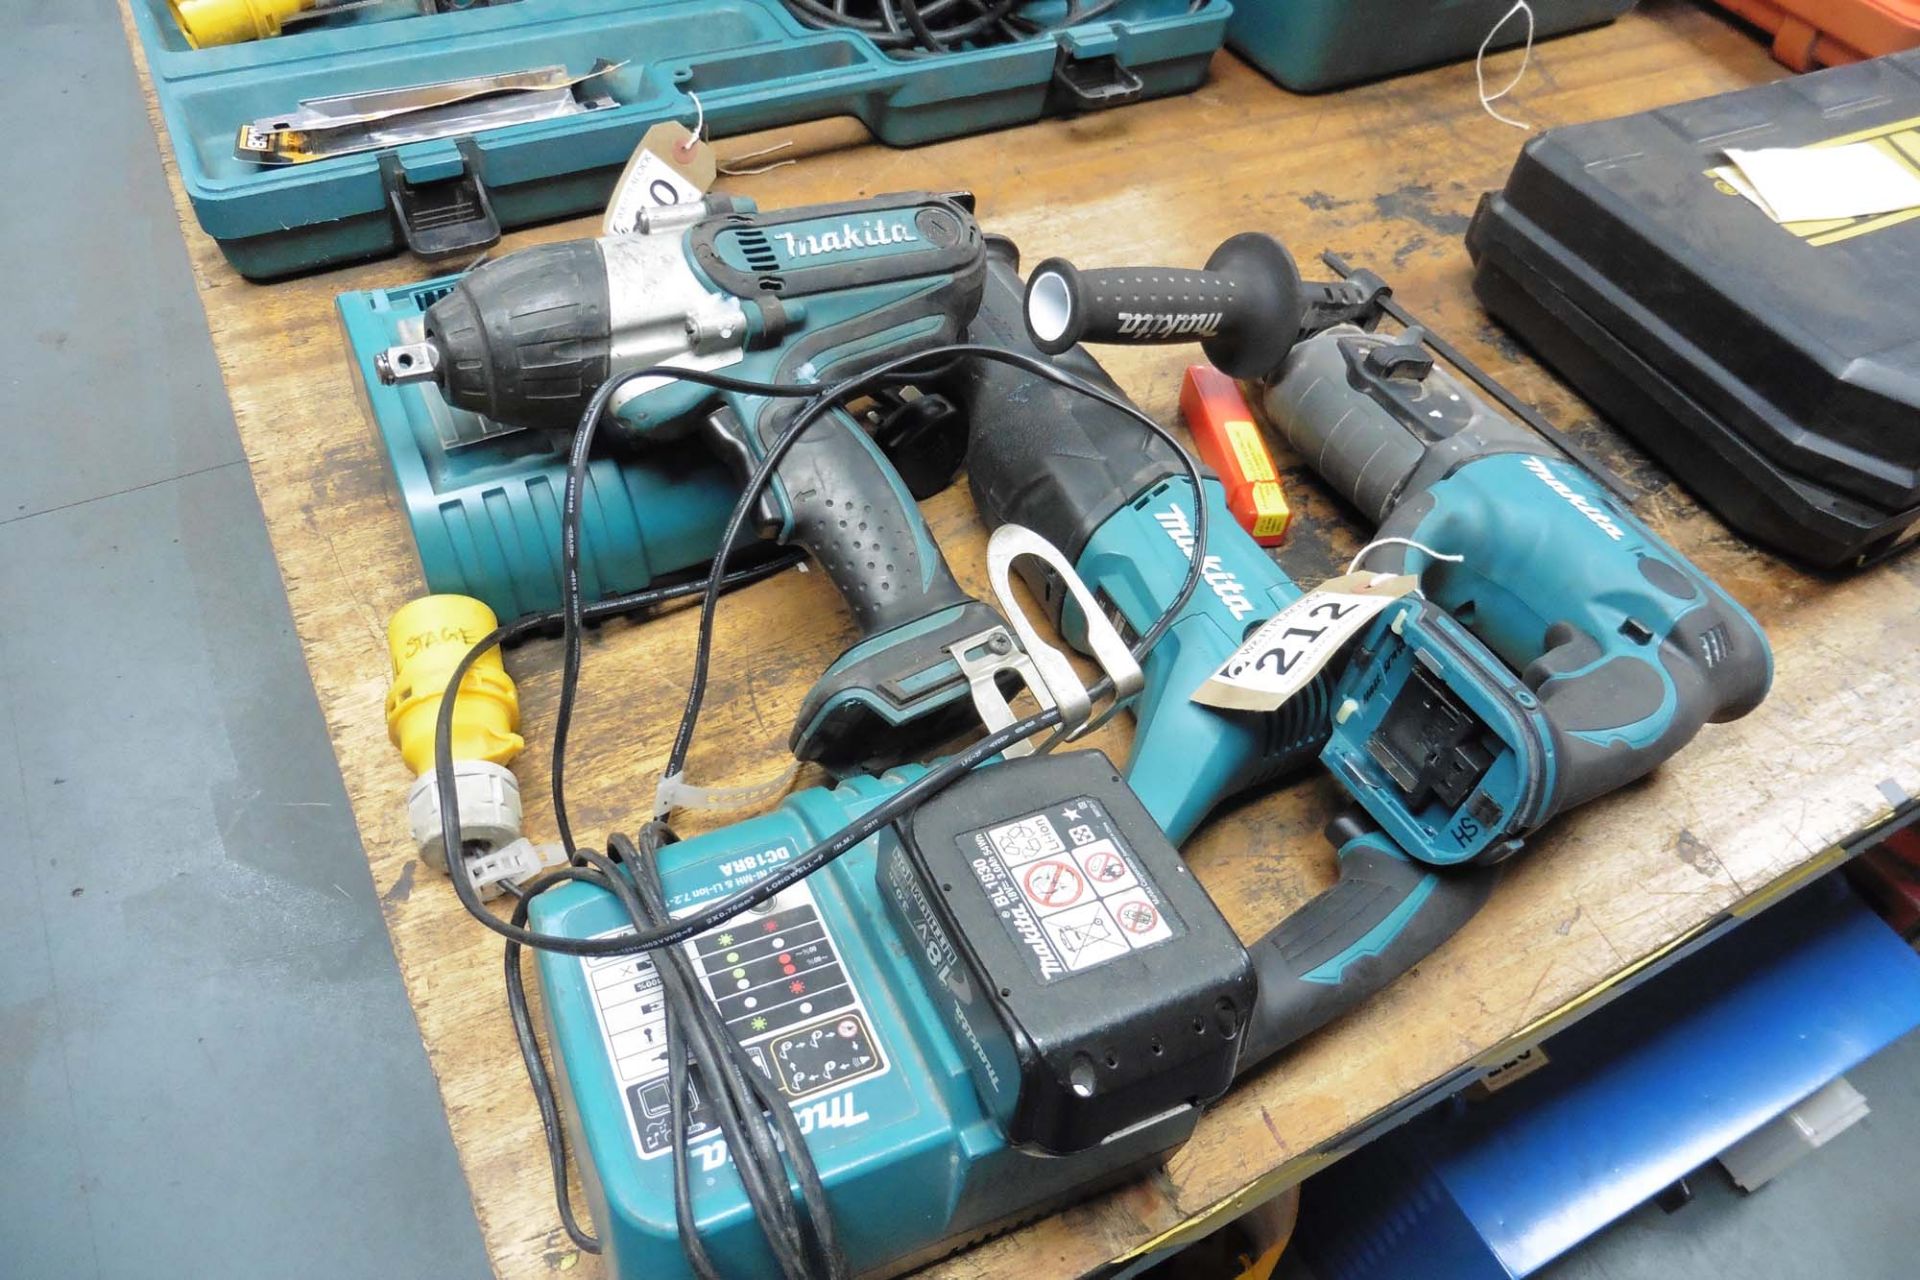 Qty of Makita battery tools, with 1 battery, 2 chargers, wrench, reciprocating saw and hammer drill